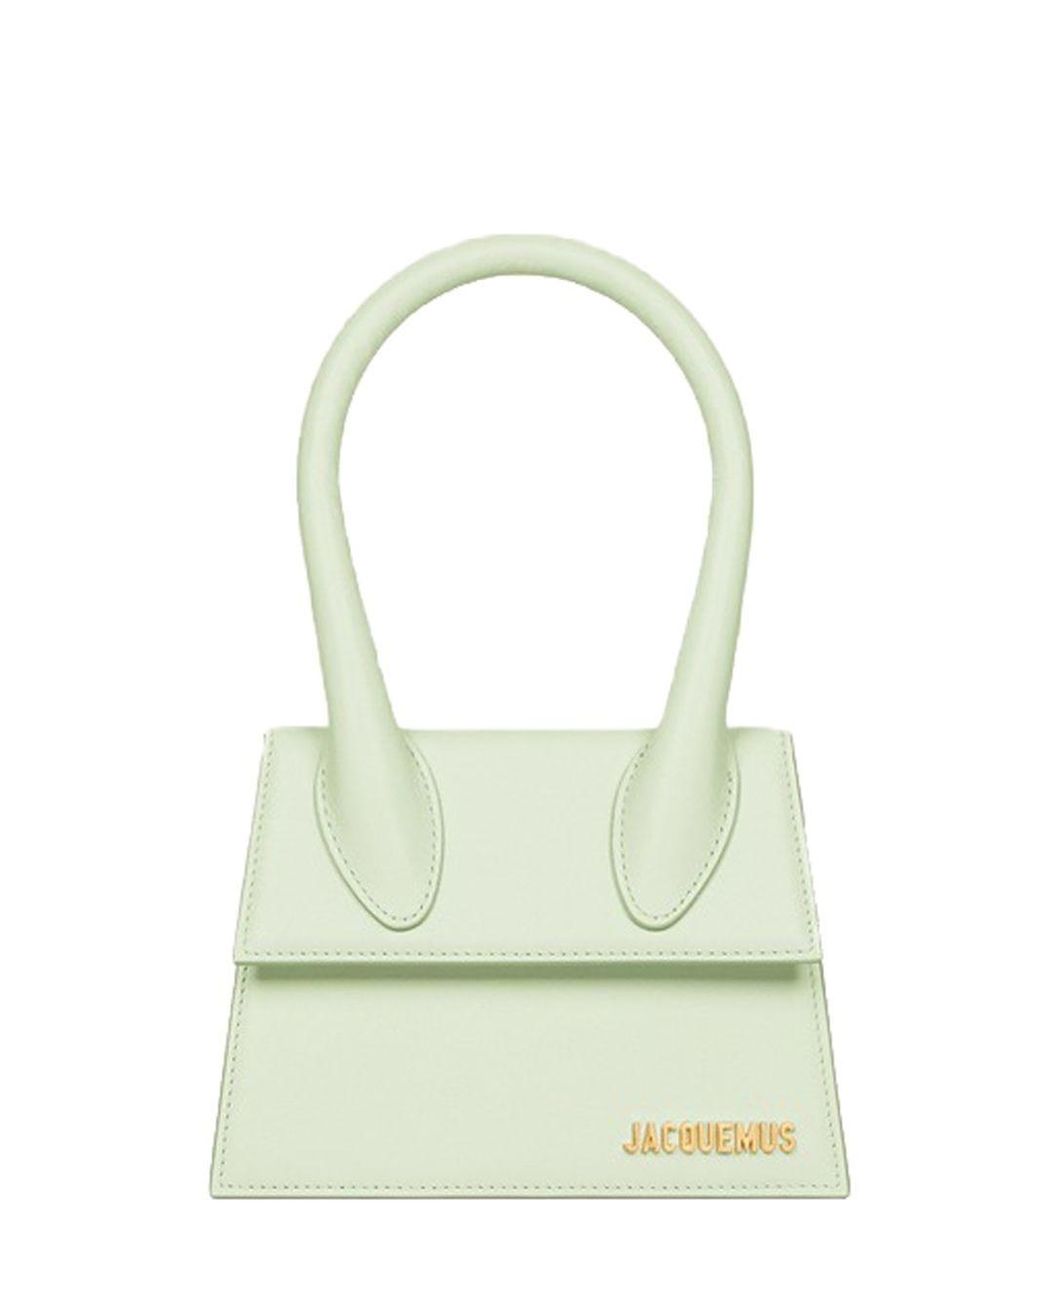 Jacquemus Le Chiquito Moyen Bag in Green | Lyst